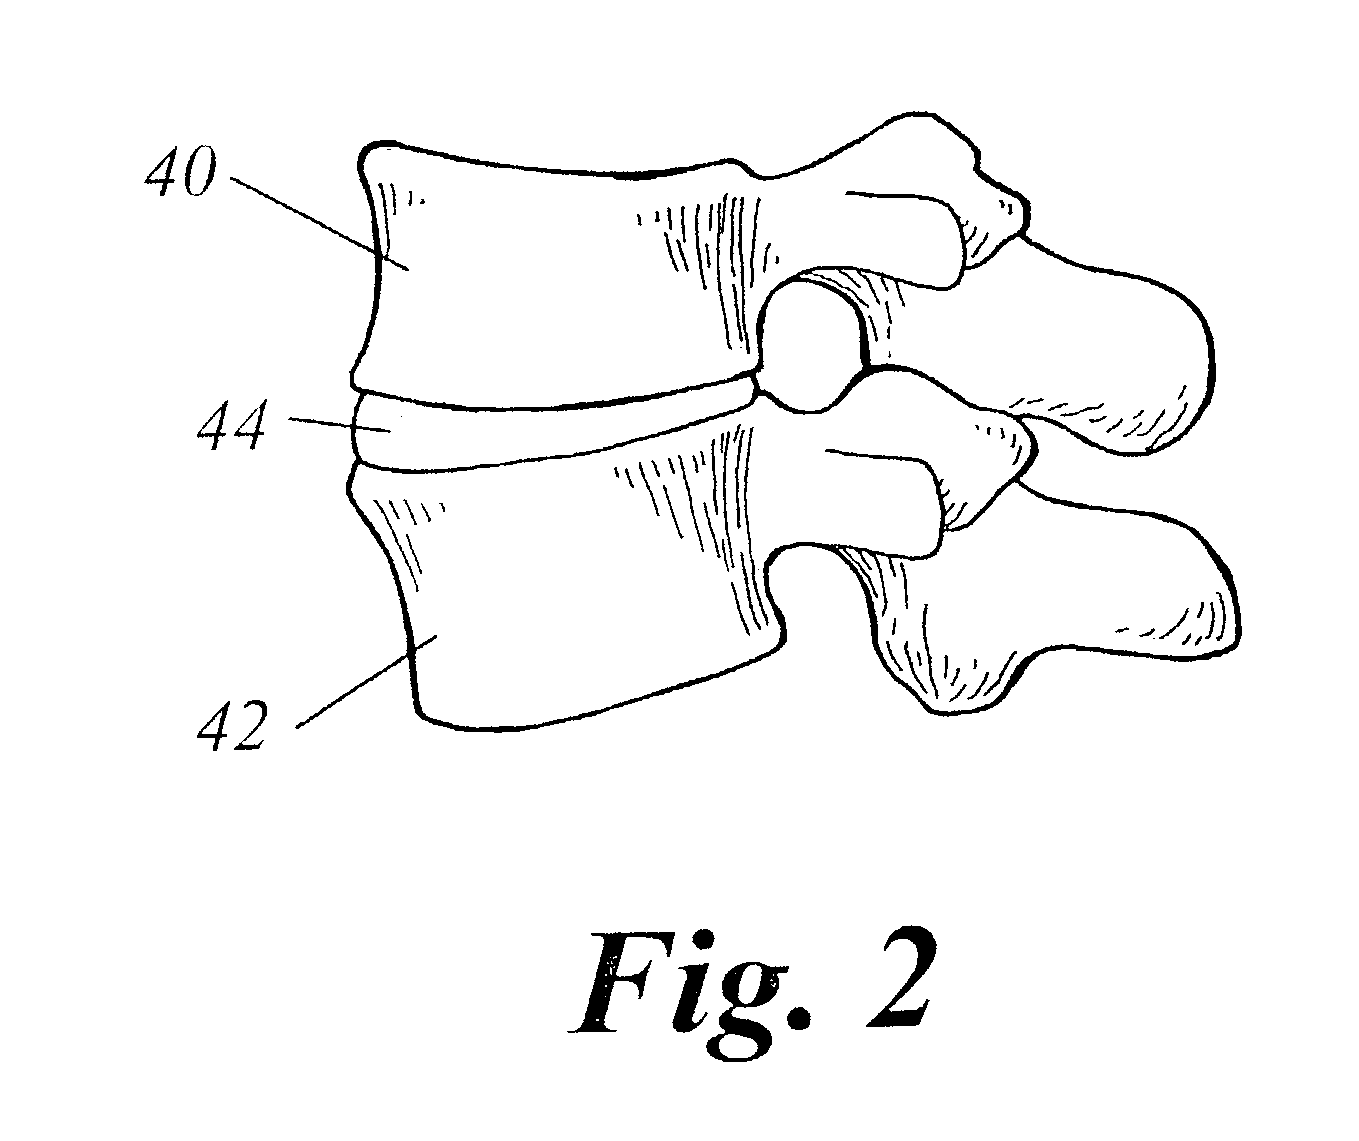 Spinal fusion using an HMG-CoA reductase inhibitor